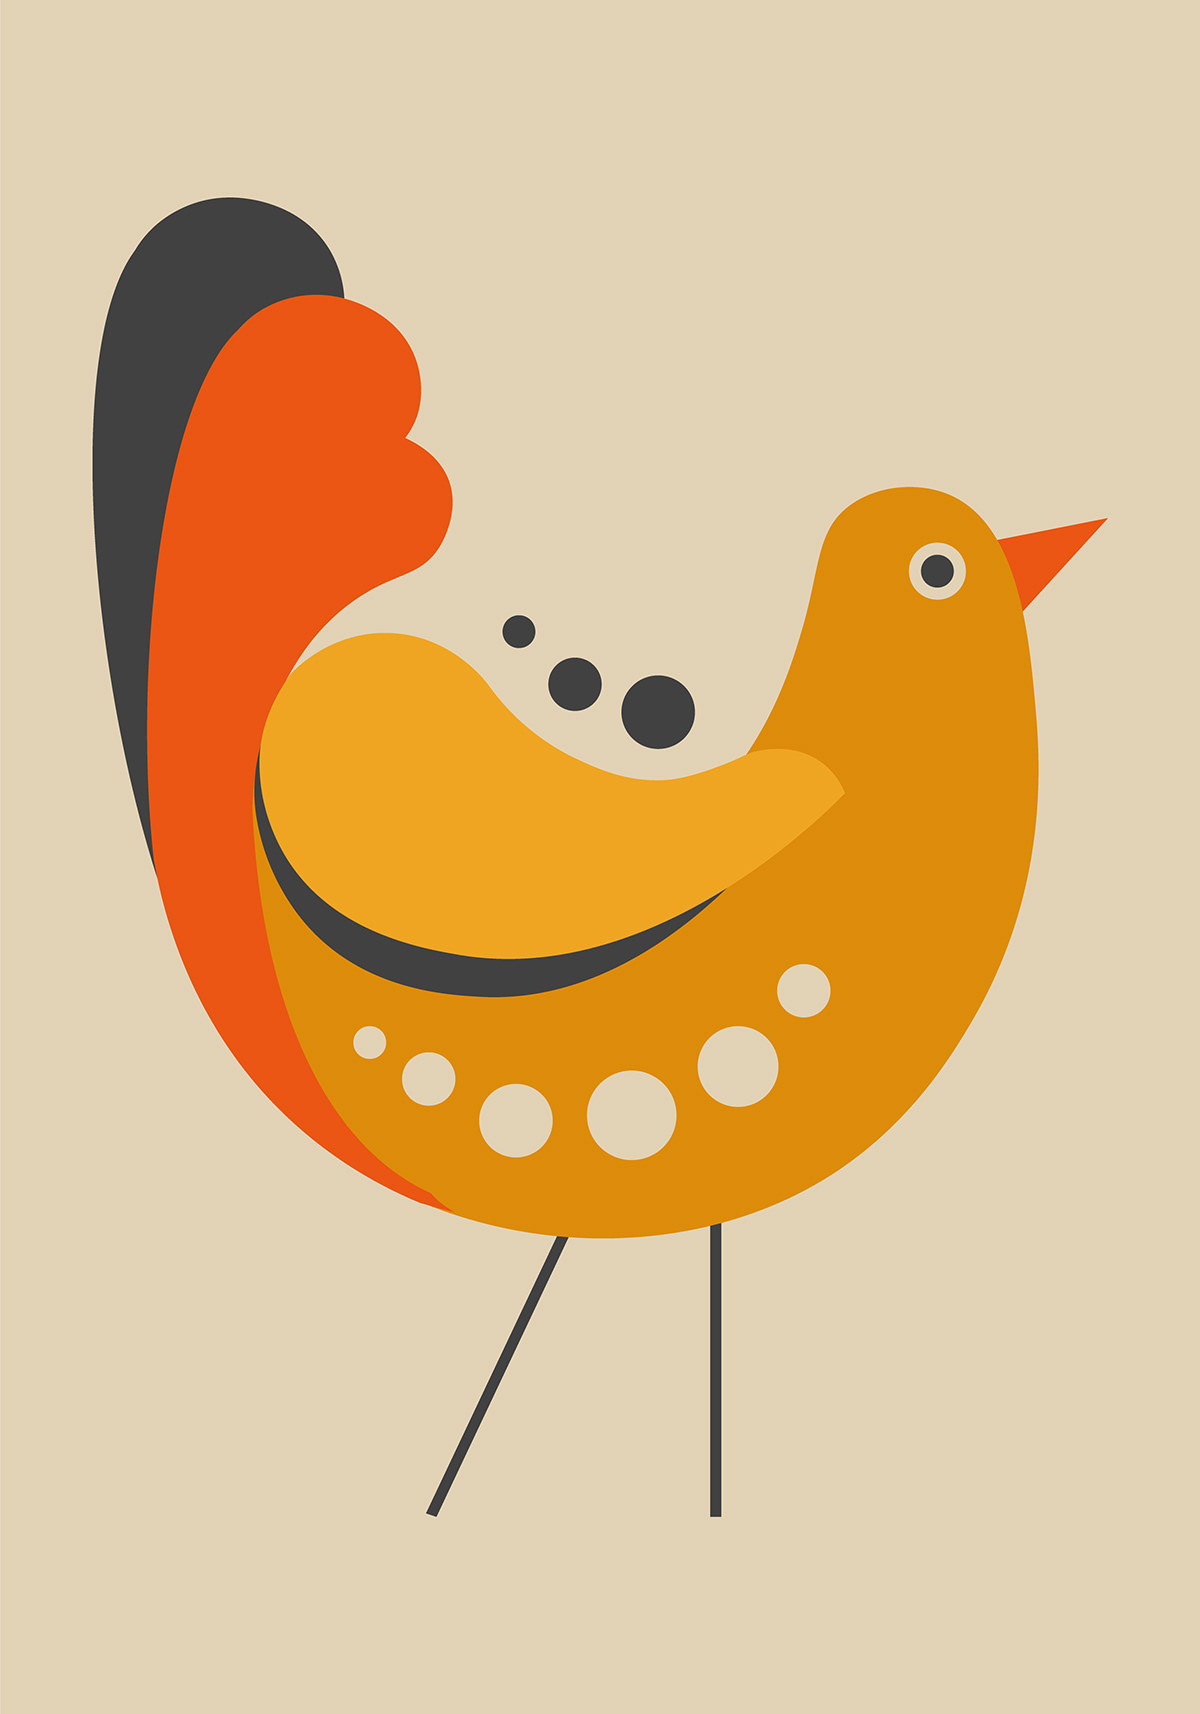 Birds and Seasons PART 1 on Behance